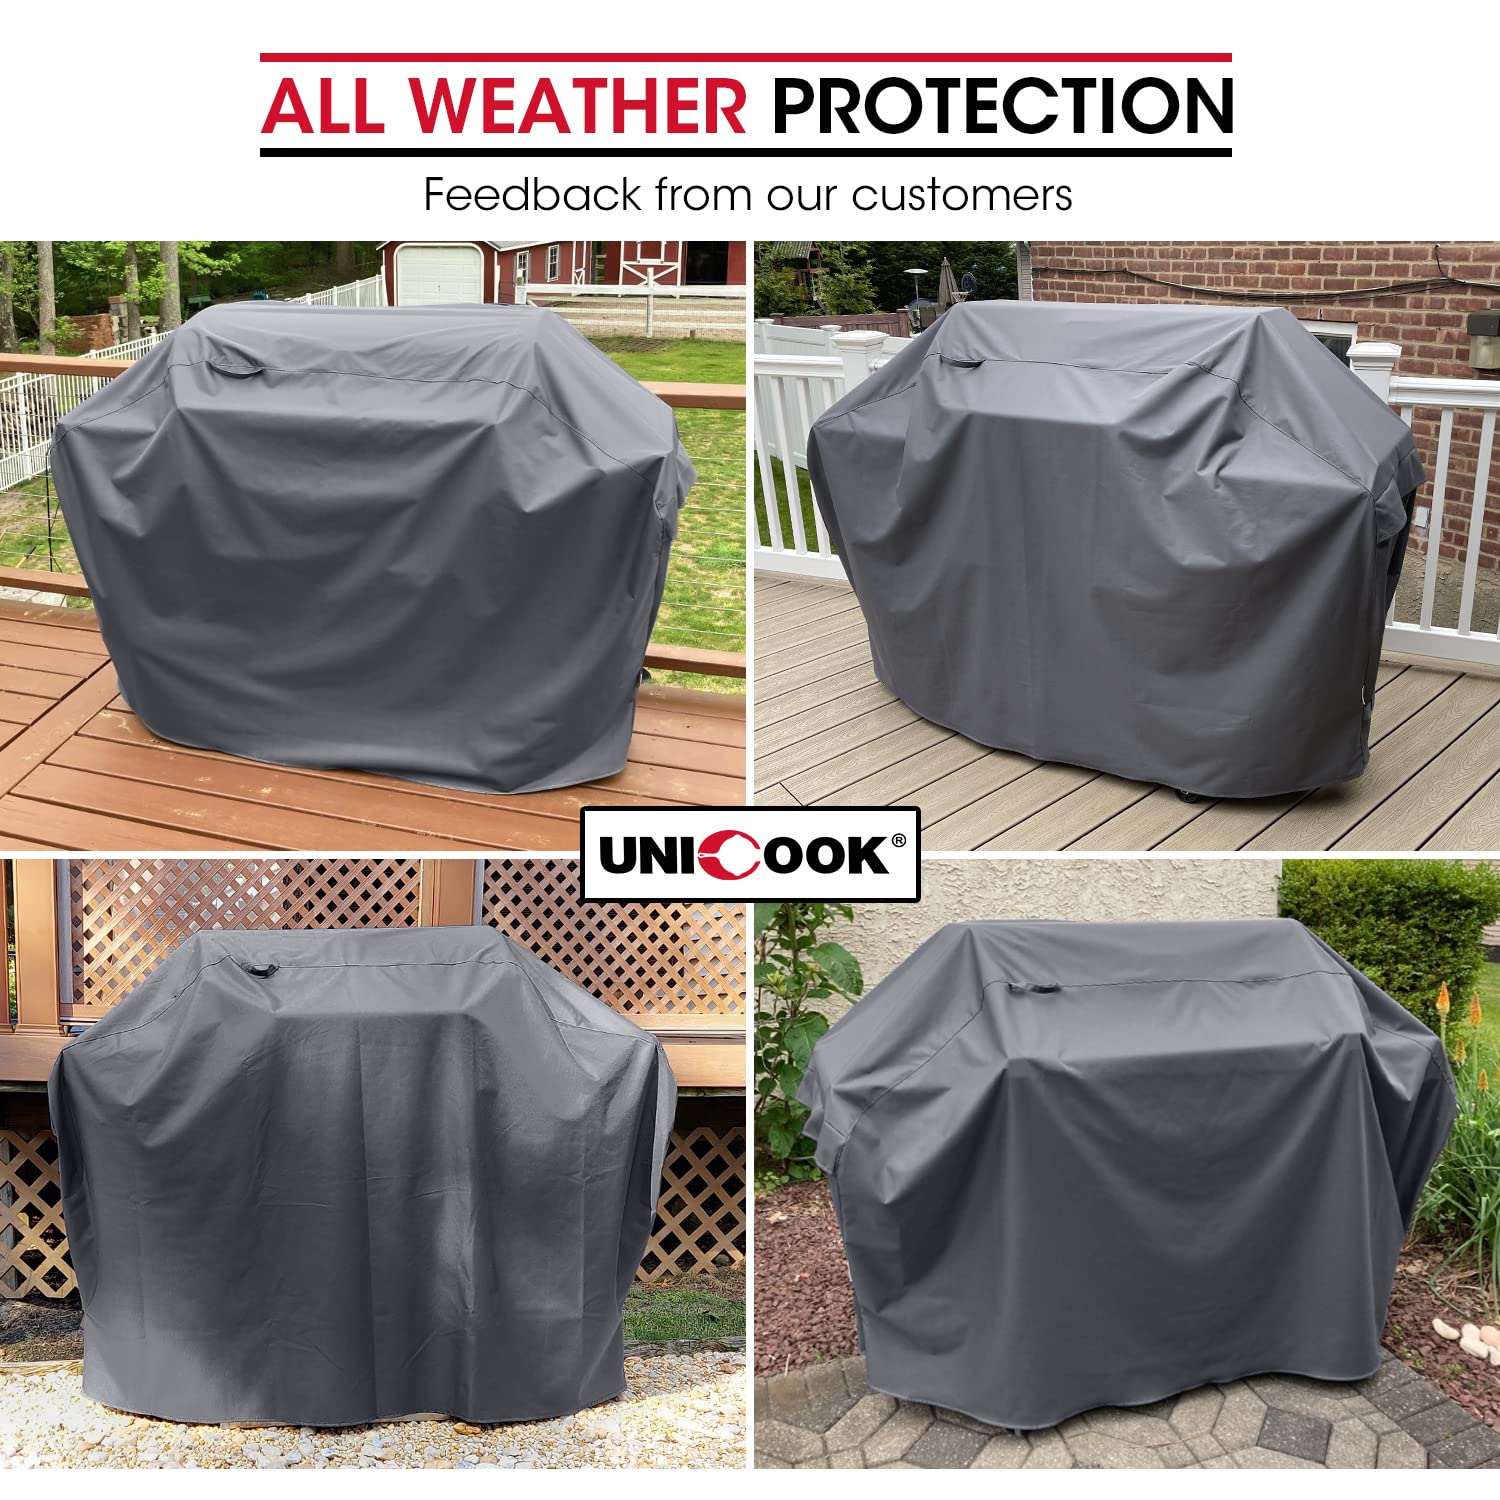 Unicook 50 Inch grill cover for Outdoor grill, 2-3 Burner BBQ grill cover for 48 Inch Weber charbroil grills, Heavy Duty Waterpr